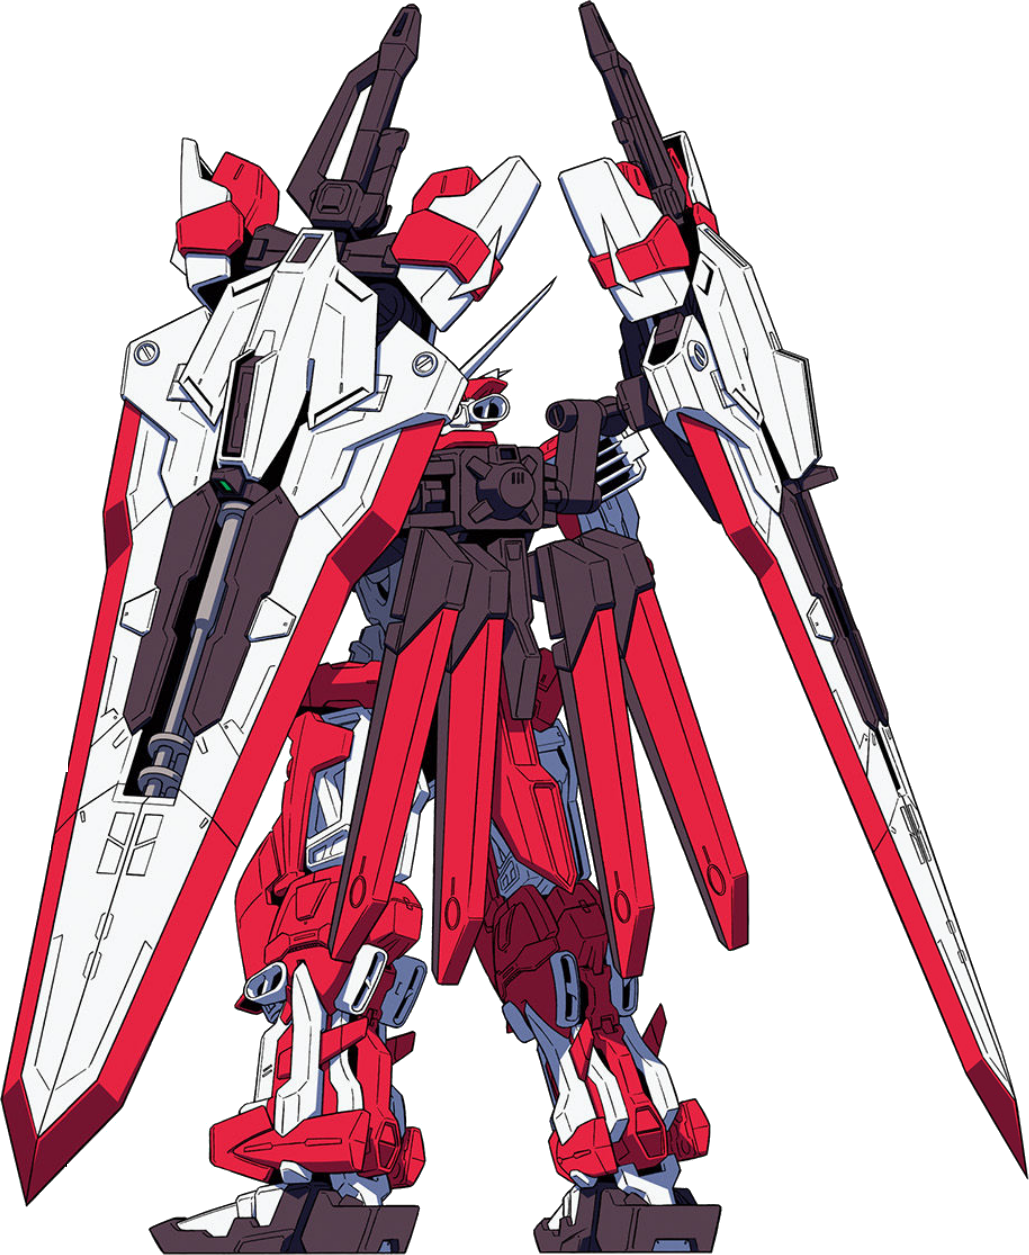 https://static.wikia.nocookie.net/gundam/images/e/e4/GSDAR_Astray_Turn_Red_rear.png/revision/latest?cb=20211126151654